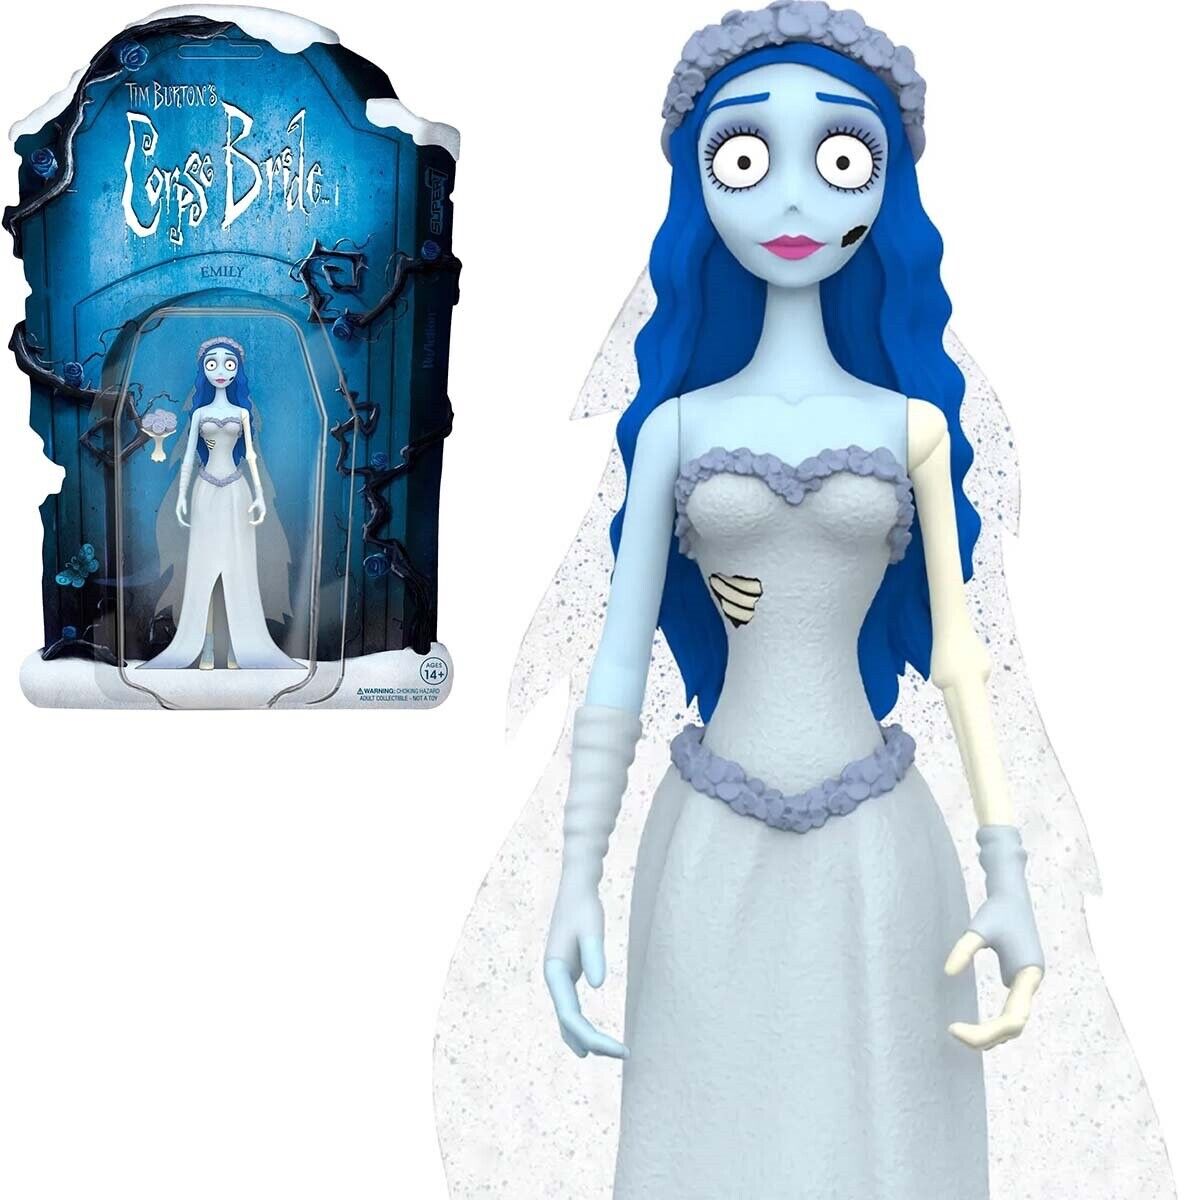 Tim Burton • EMILY • CORPSE BRIDE •  3 ¾ in • SUPER7 • ReAction Fig • Ships Free